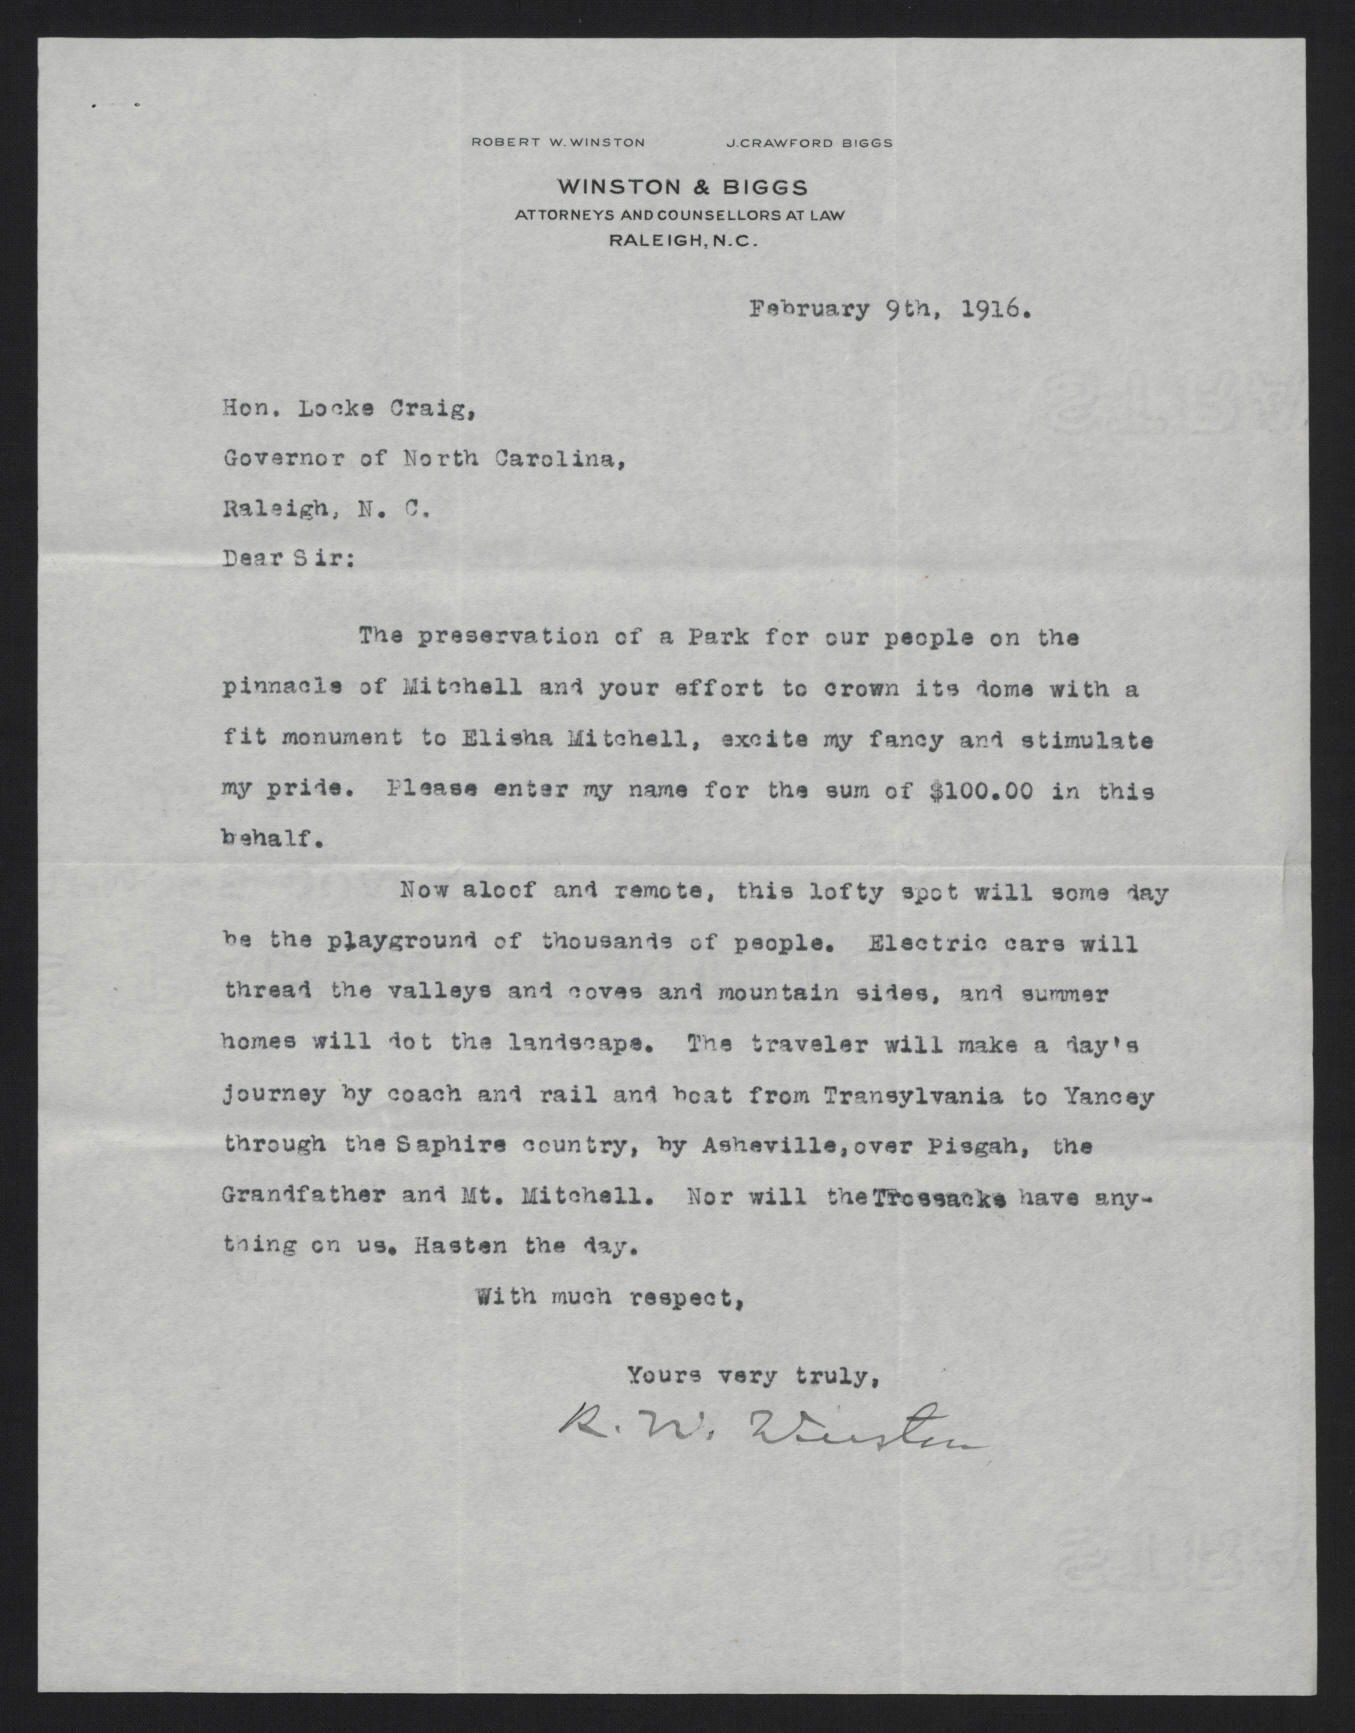 Letter from Winston to Craig, February 9, 1916